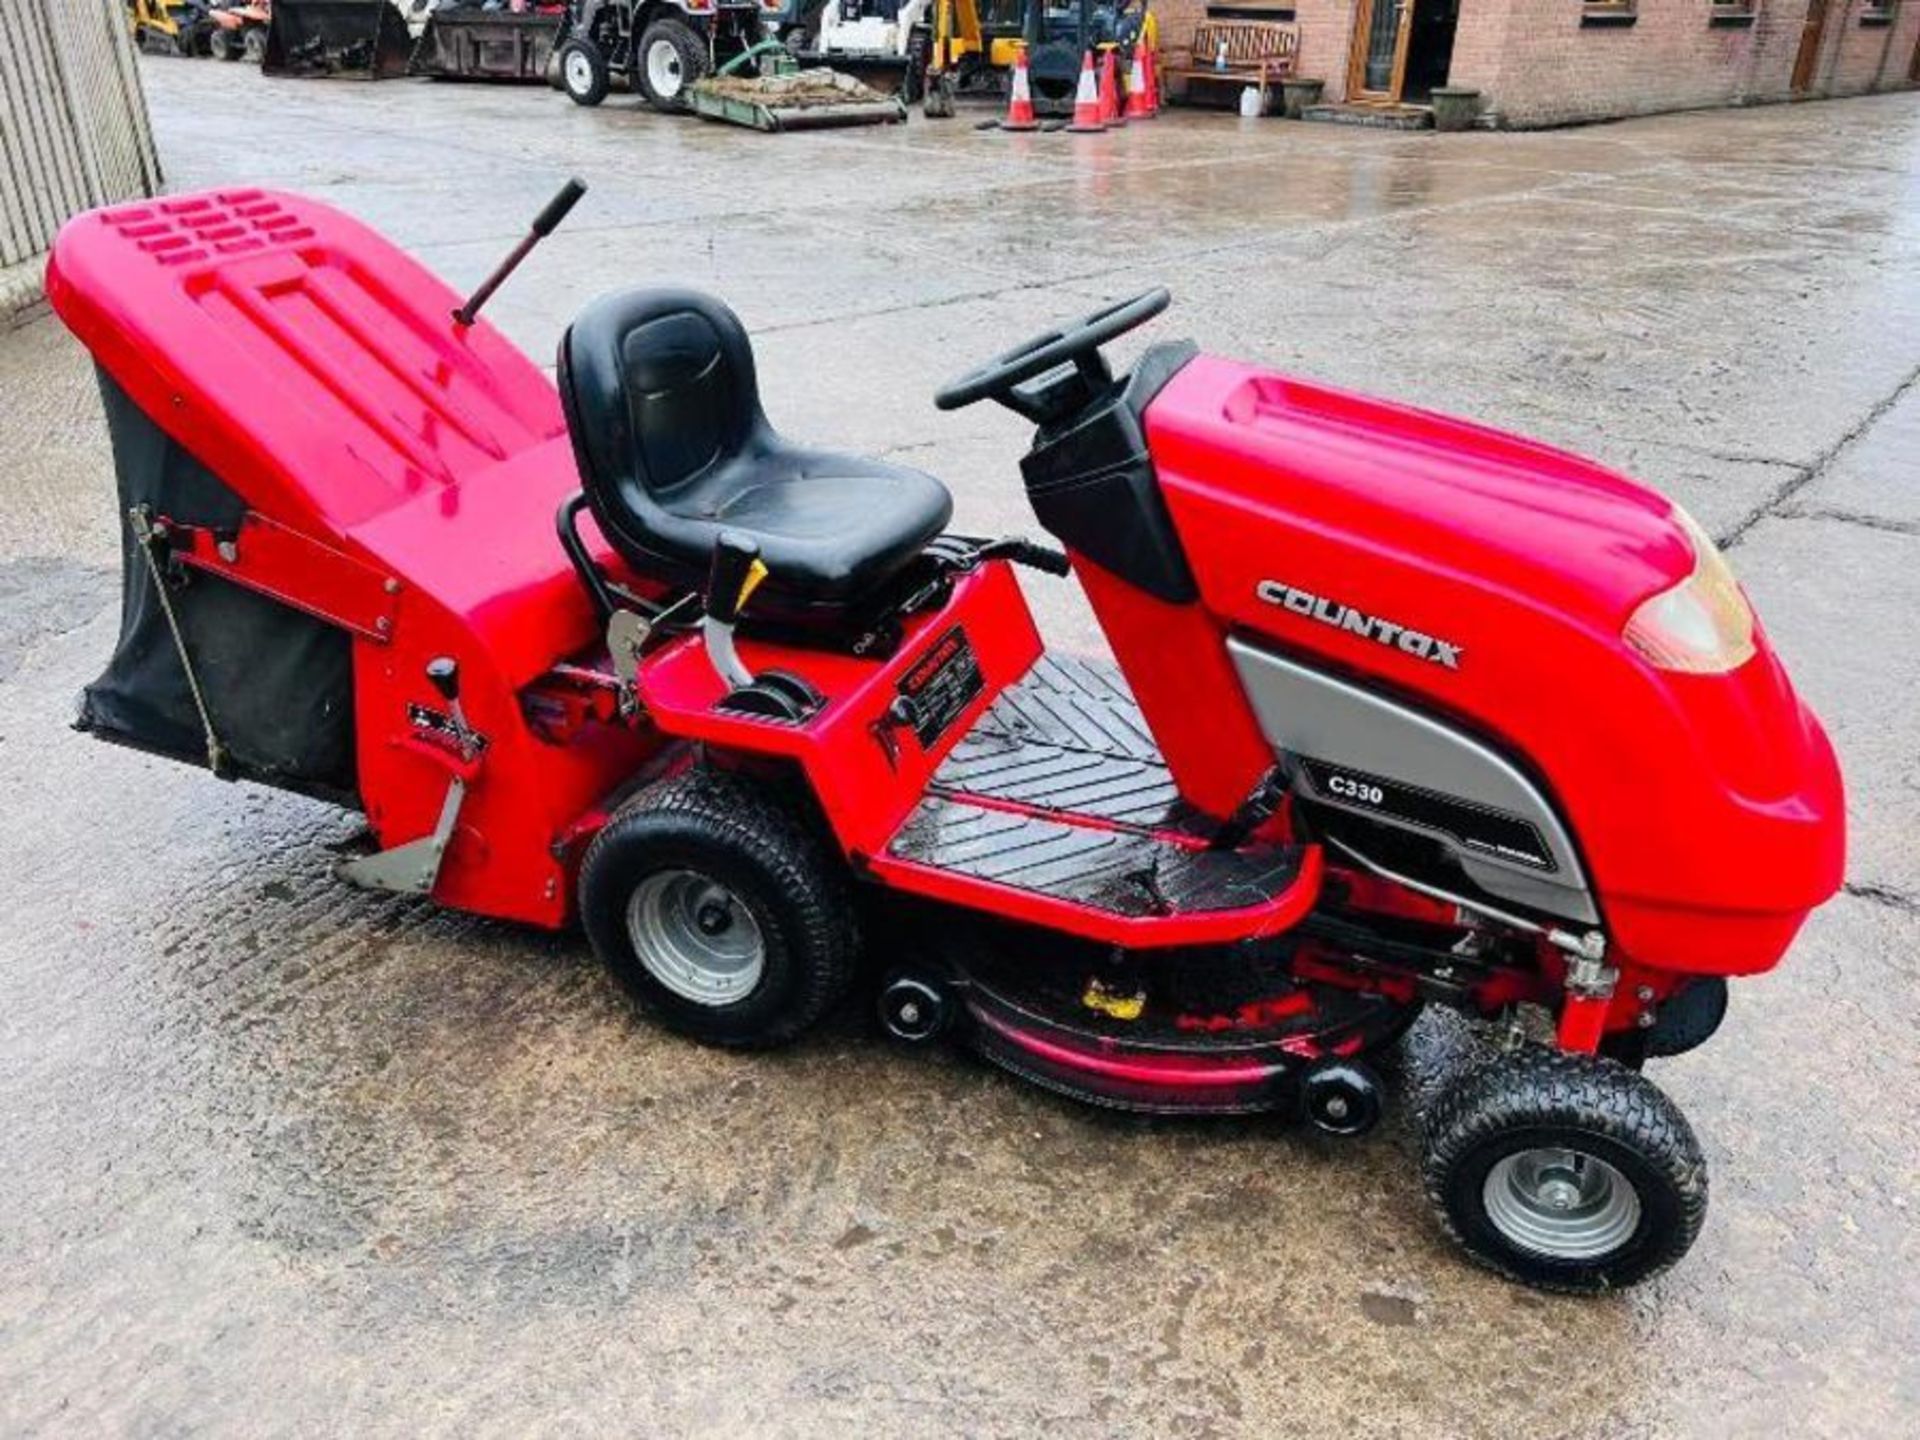 COUNTAX 330 RIDE ON MOWER *YEAR 2009* C/W COLLECTION BOX & HONDA ENGINE.